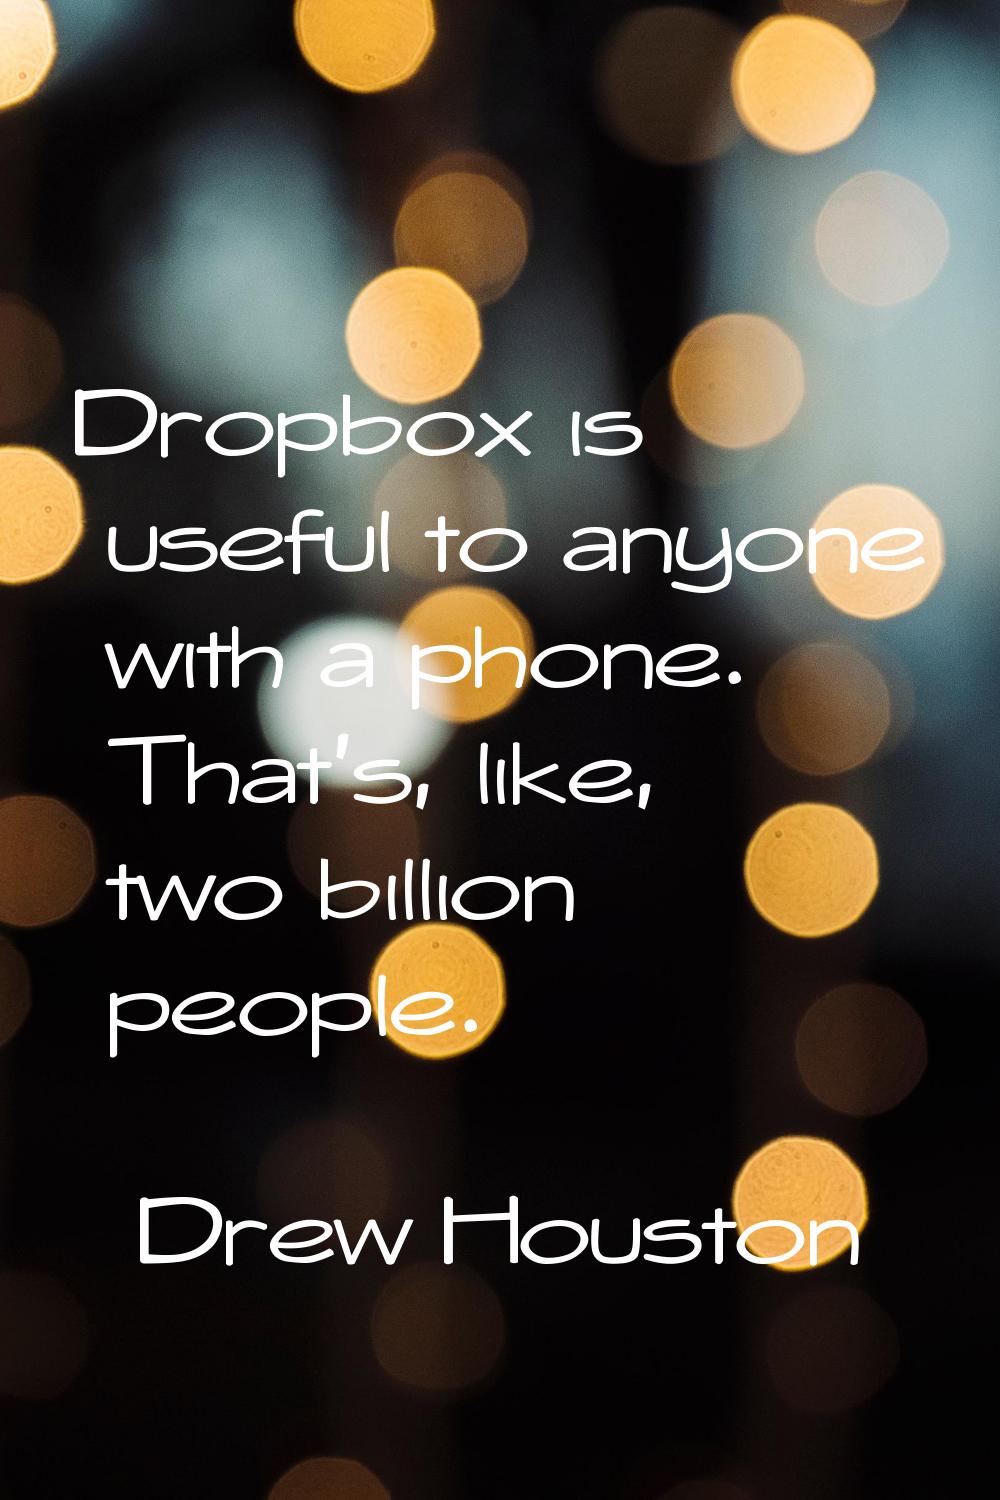 Dropbox is useful to anyone with a phone. That's, like, two billion people.